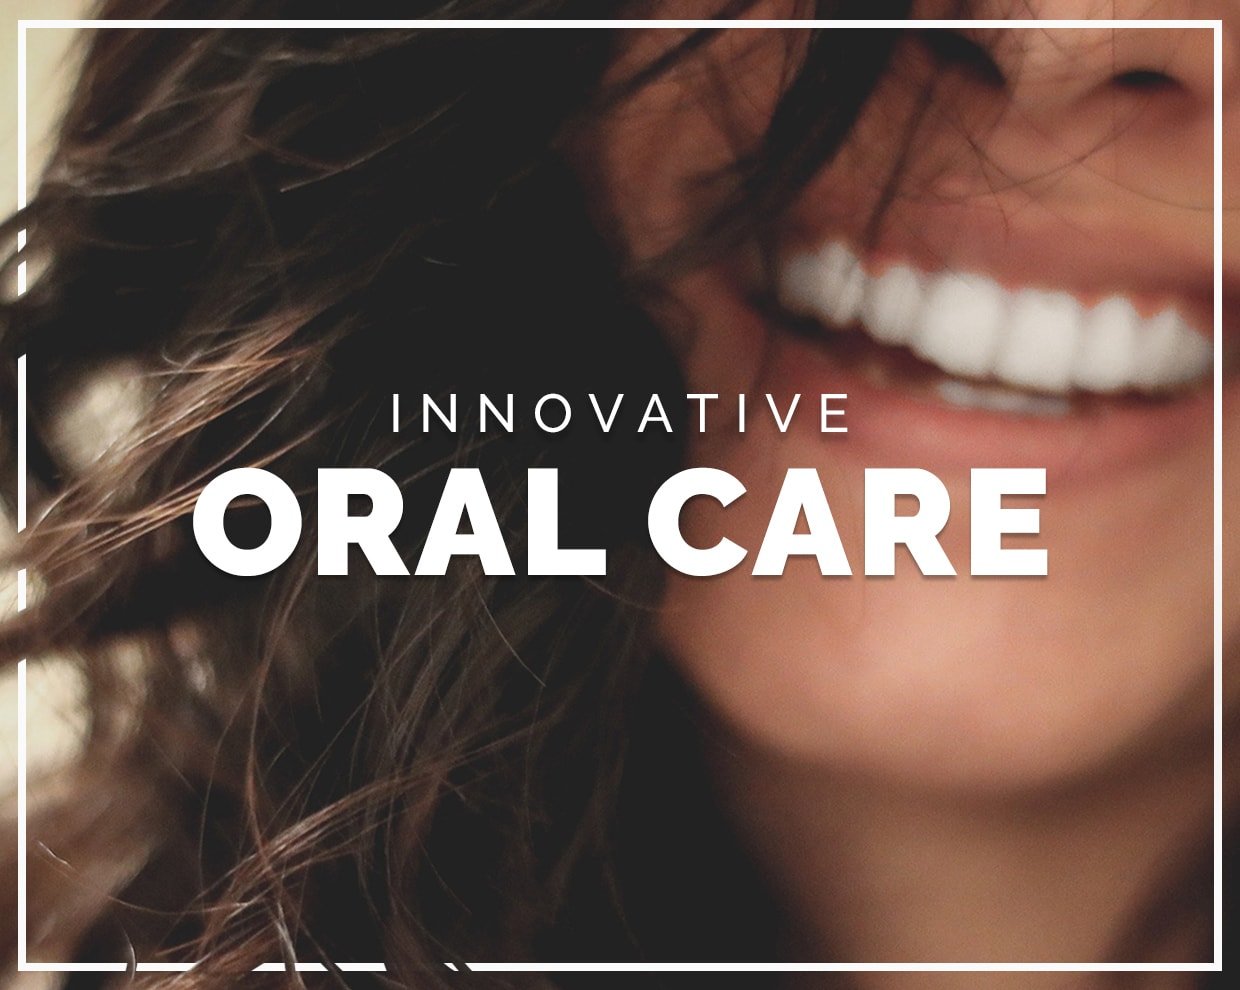 Functional Self launches Dr Hisham’s Natural Oral Care System